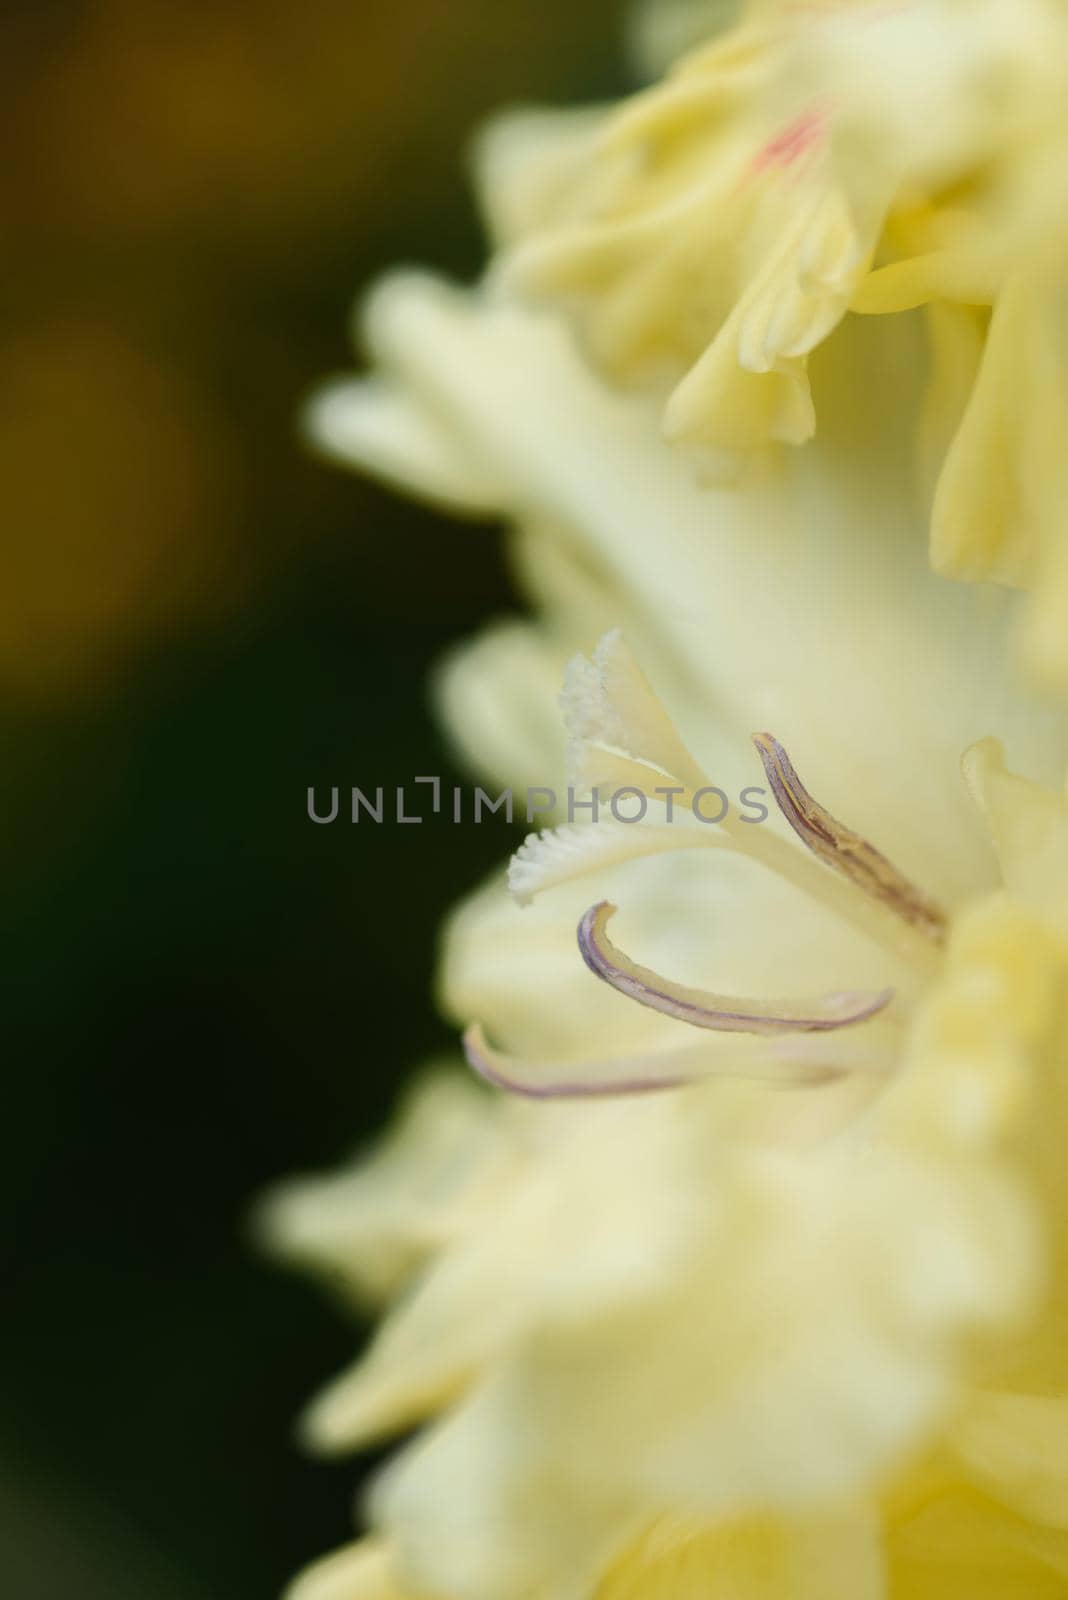 Extreme close-up of the gladiolus inflorescence with pistils and stamens in detail and very close.